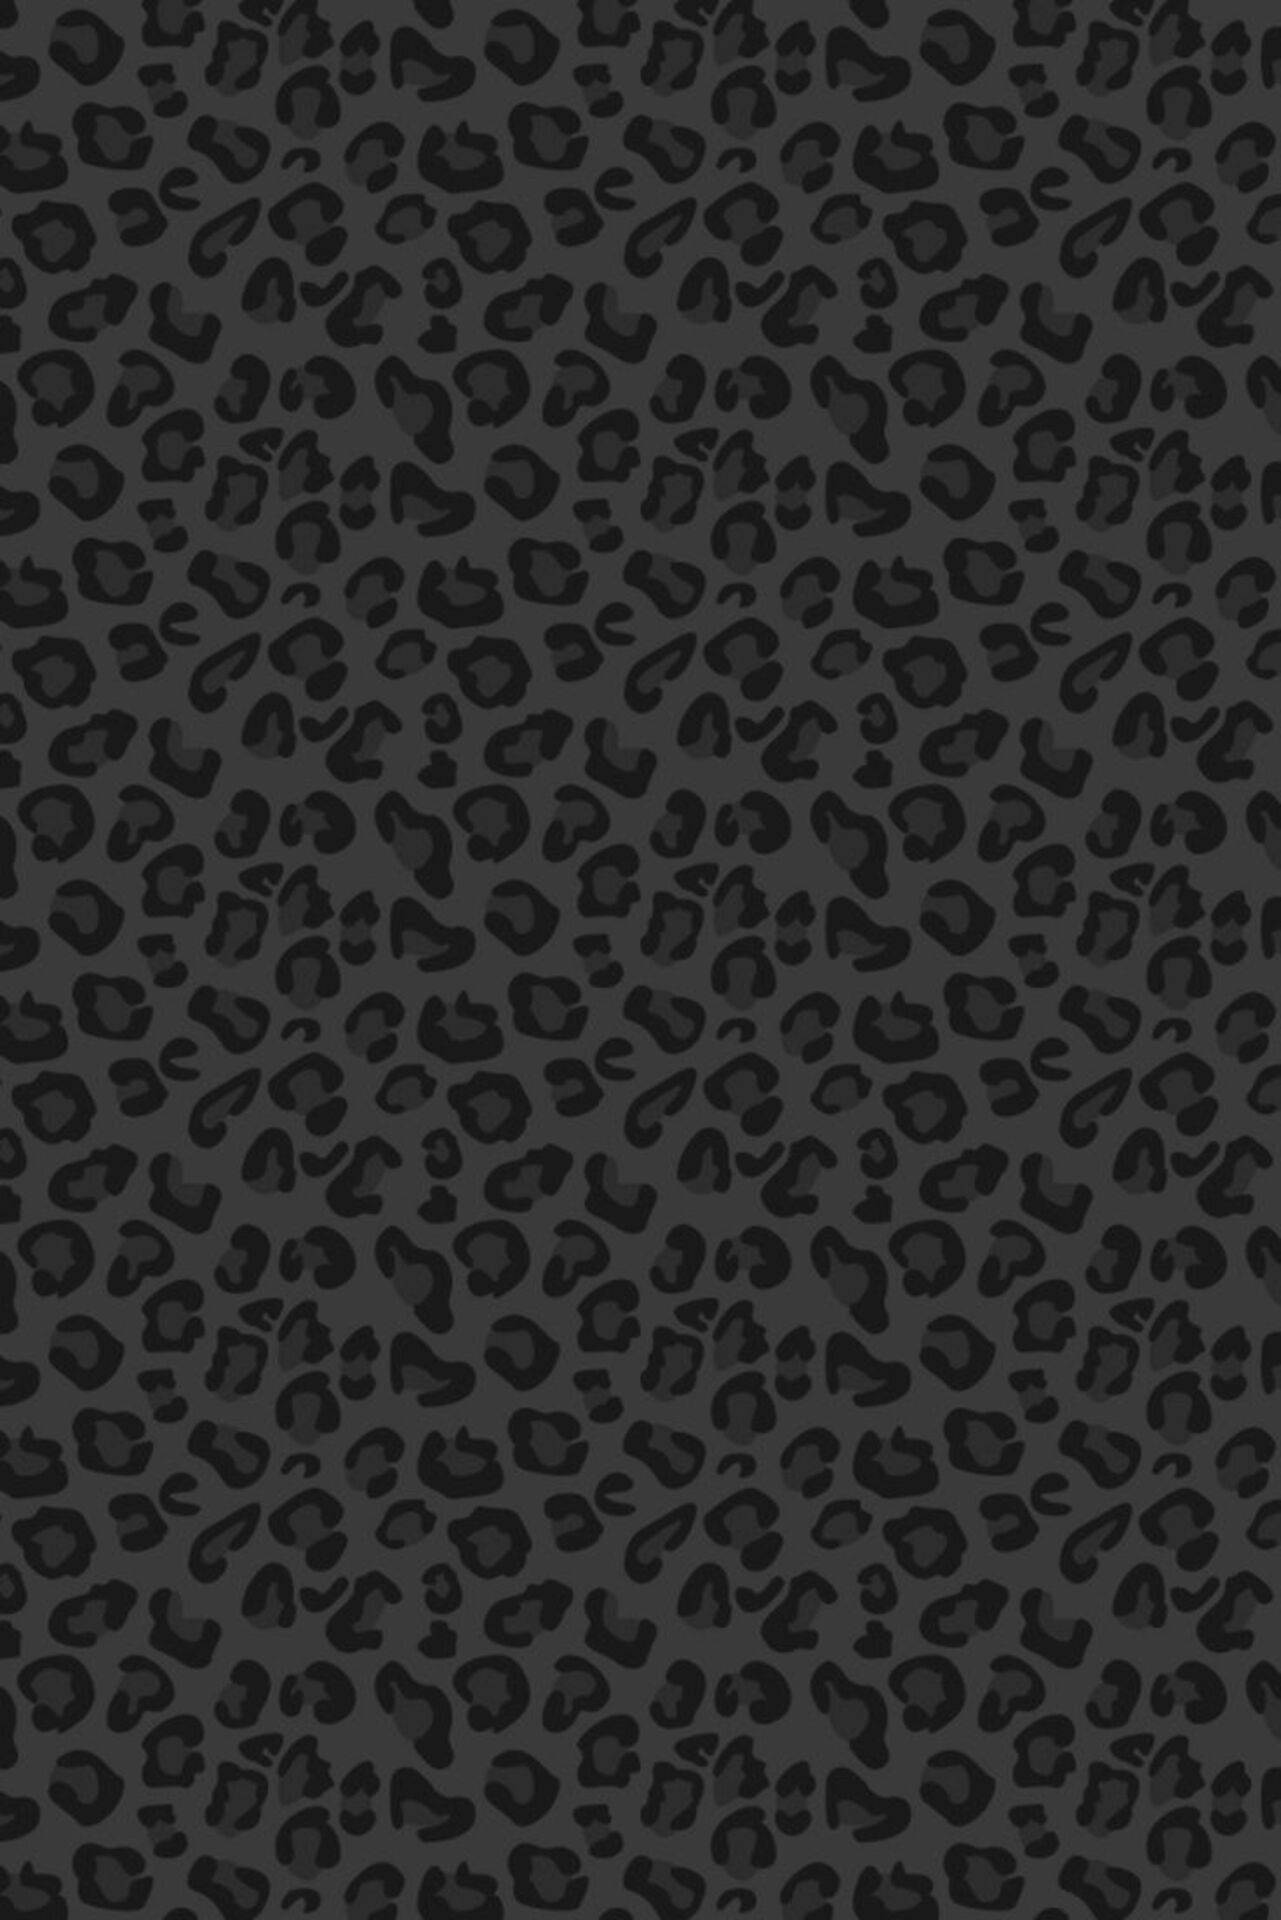 Leopard Print 1281X1920 Wallpaper and Background Image